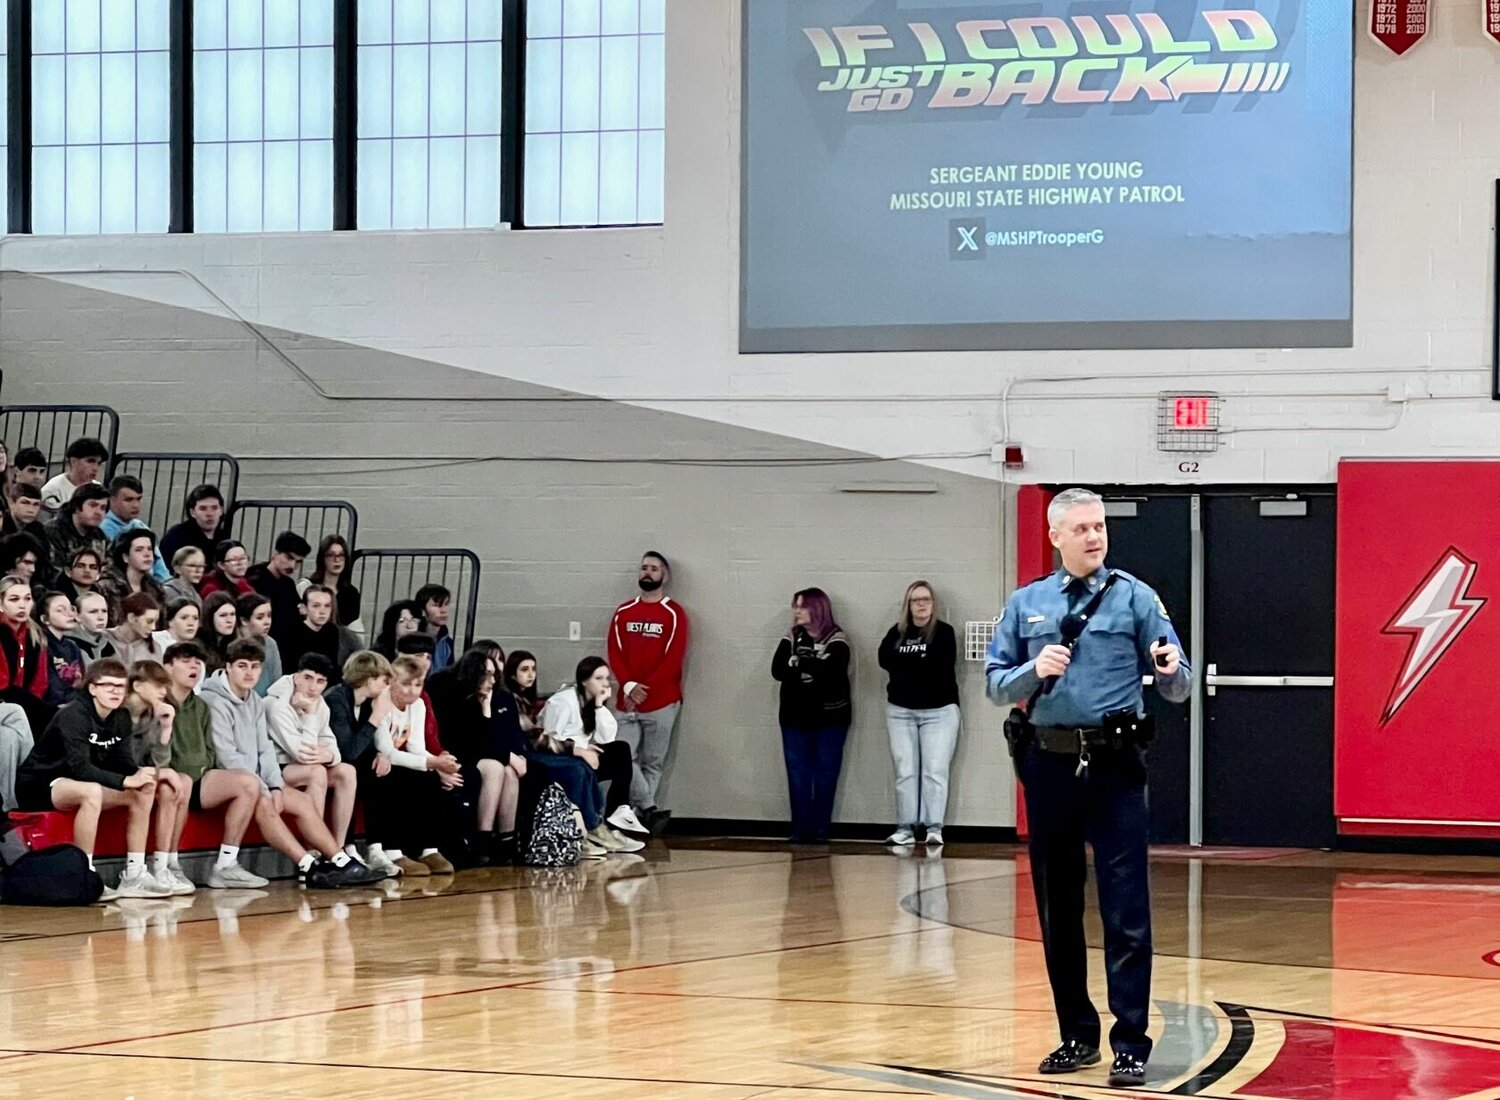 As part of the West Plains High School Buckle Up, Phone Down Challenge, West Plains High School students participated in a safe driving assembly led Friday morning by Sgt. Eddie Young of the Missouri Highway Patrol. The West Plains High School Student Council has issued a challenge to collect pledges for the Missouri Buckle Up, Phone Down (#BUPD) campaign through the Missouri Department of Transportation.. The STUCO students encourage everyone to pledge to buckle up and put their phones down while driving. Zizzer students, families and staff can take the #BUPD pledge online at www.savemolives.com/mcrs/AAAShowdown. The student council can earn $4,000 for the student competition, and a community competition could earn STUCO $1,500, said school officials.